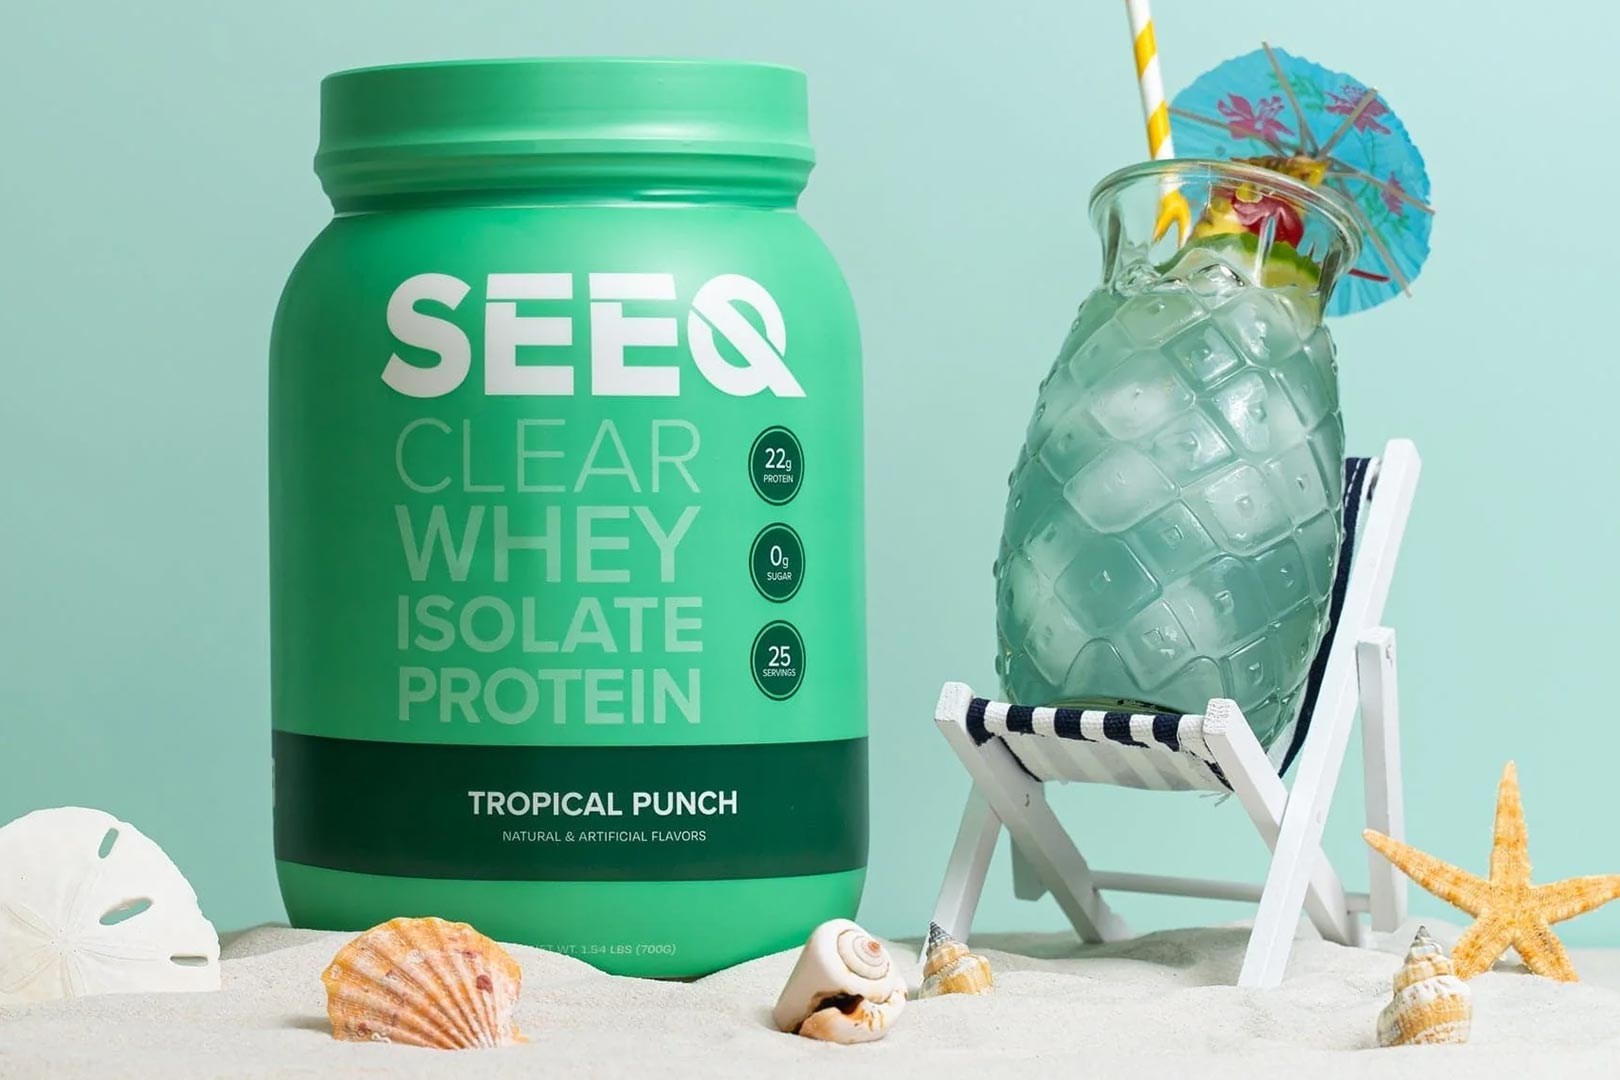 Seeq Vaults Tropical Punch Clear Whey Isolate Protein